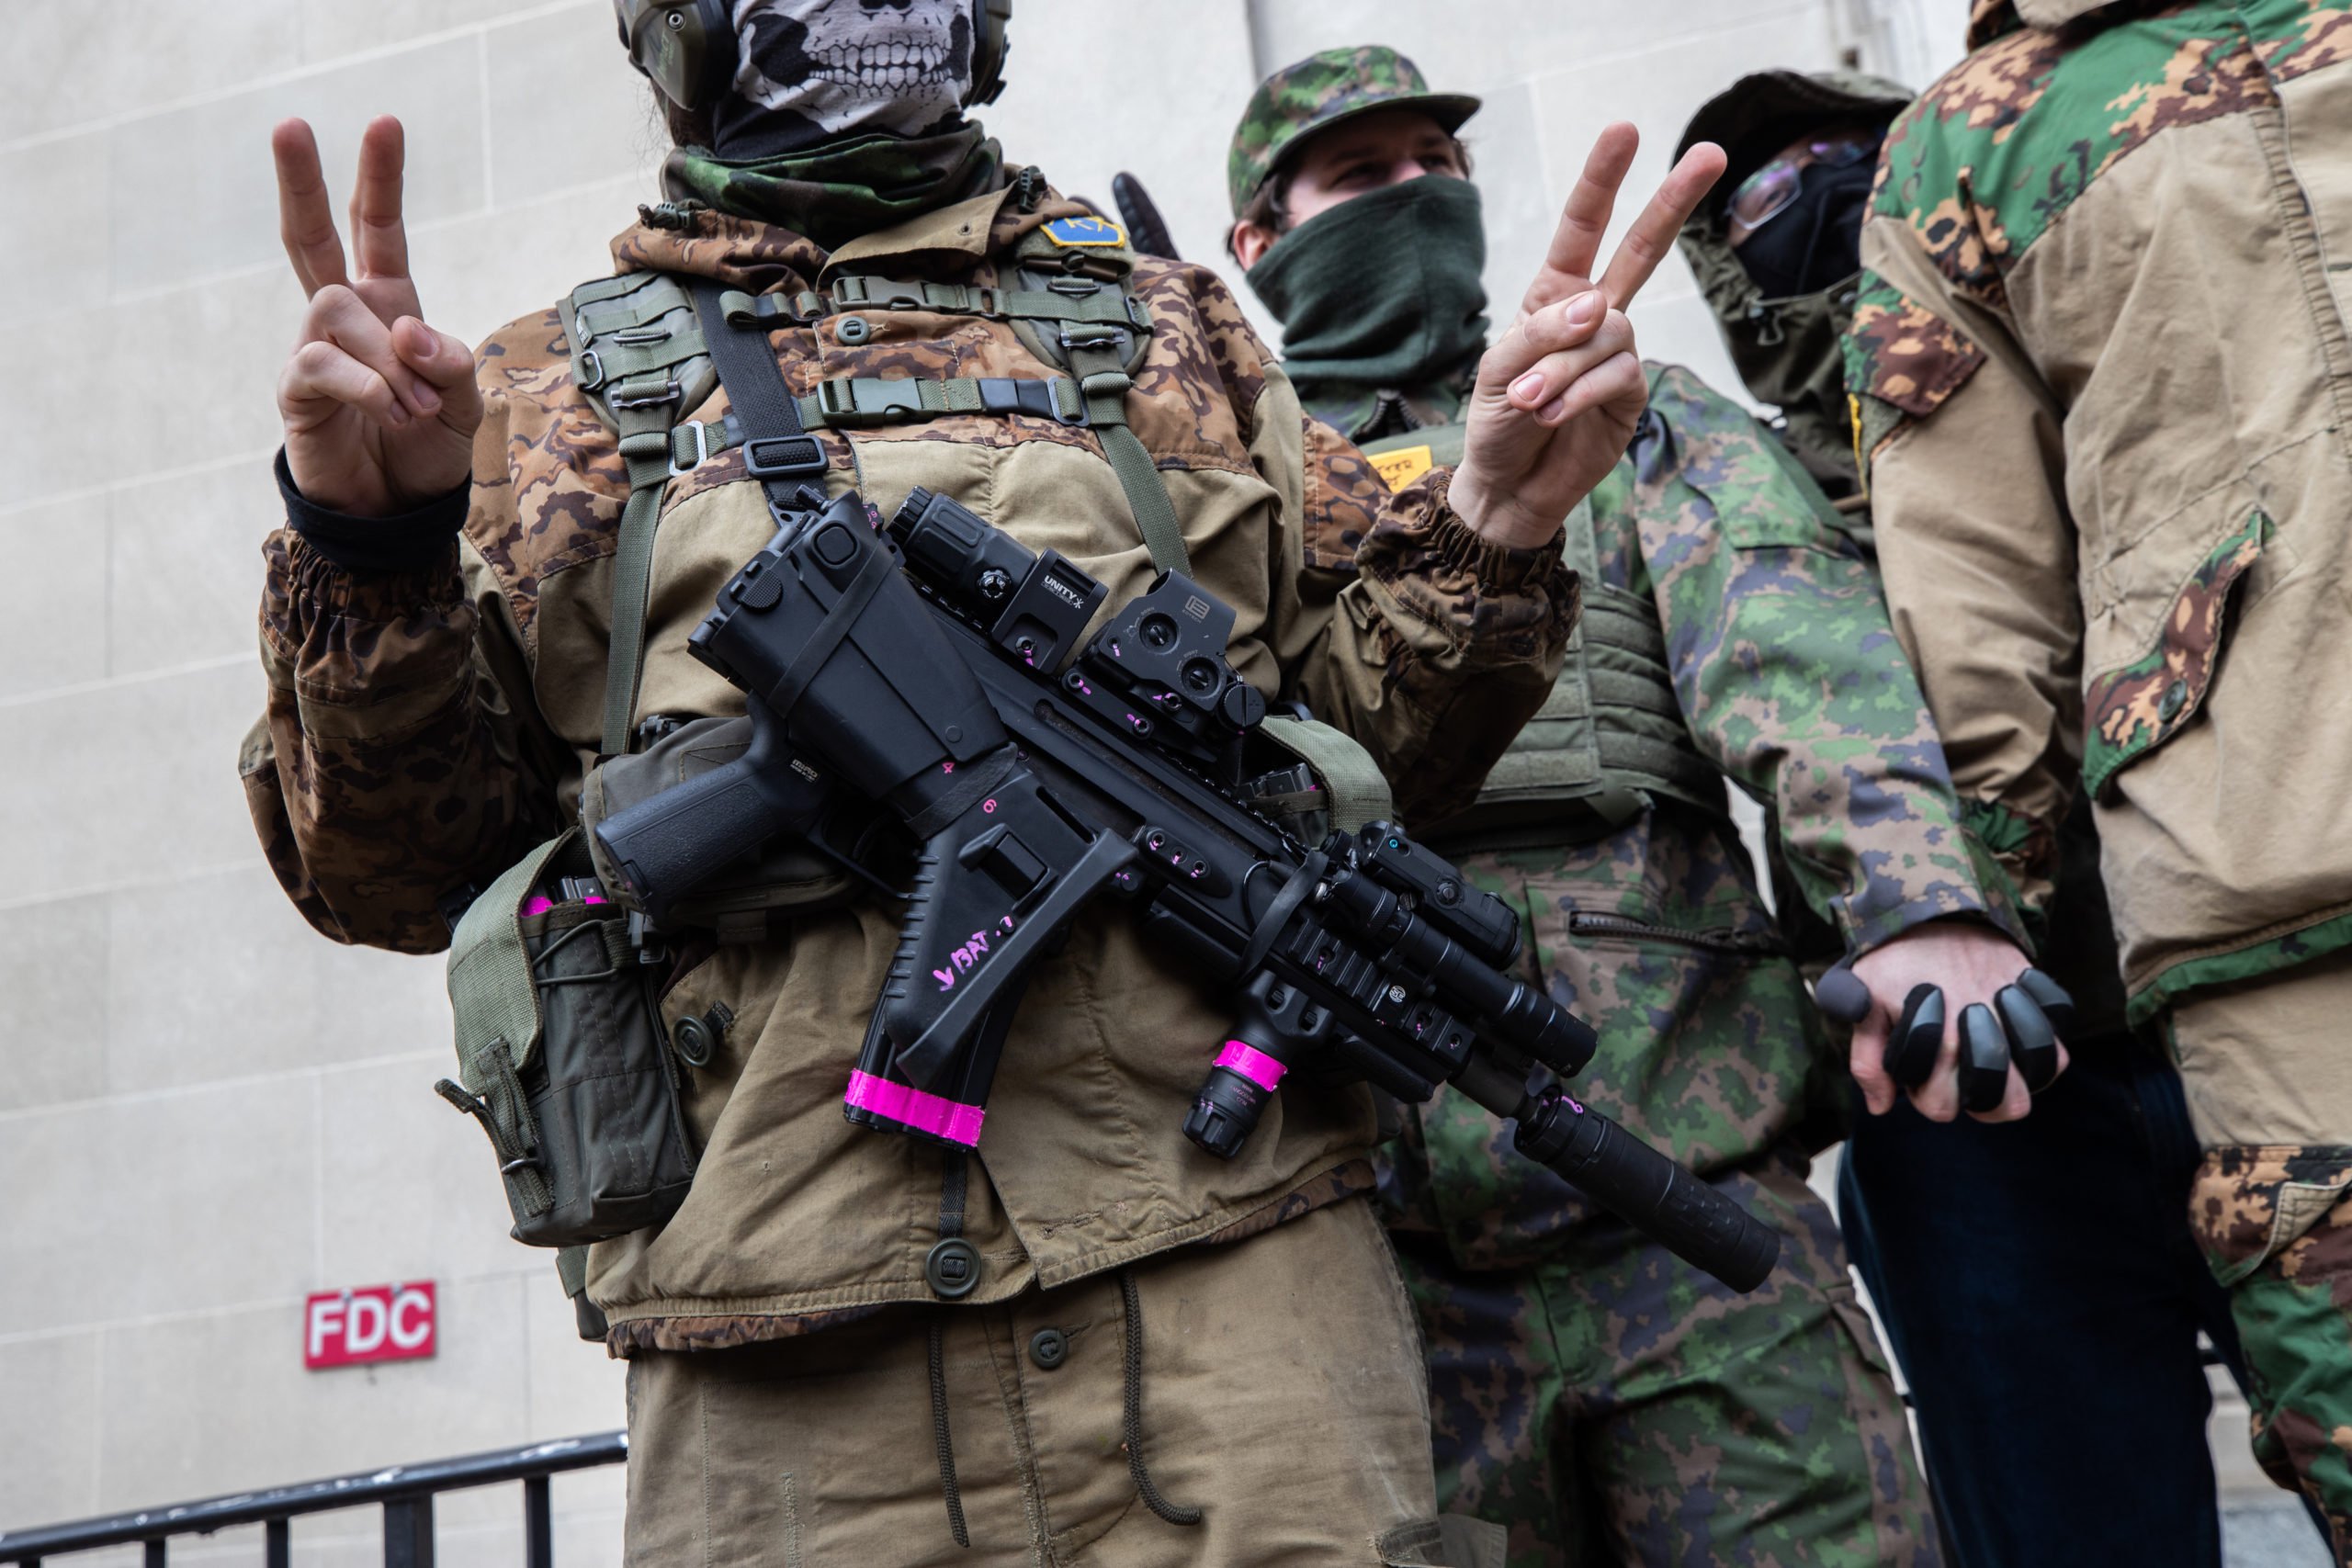 An armed demonstrator made a hand gesture while wearing a patch associated with a 4 Chan board catalog in Richmond, Virginia on January 18, 2021. (Kaylee Greenlee - Daily Caller News Foundation)